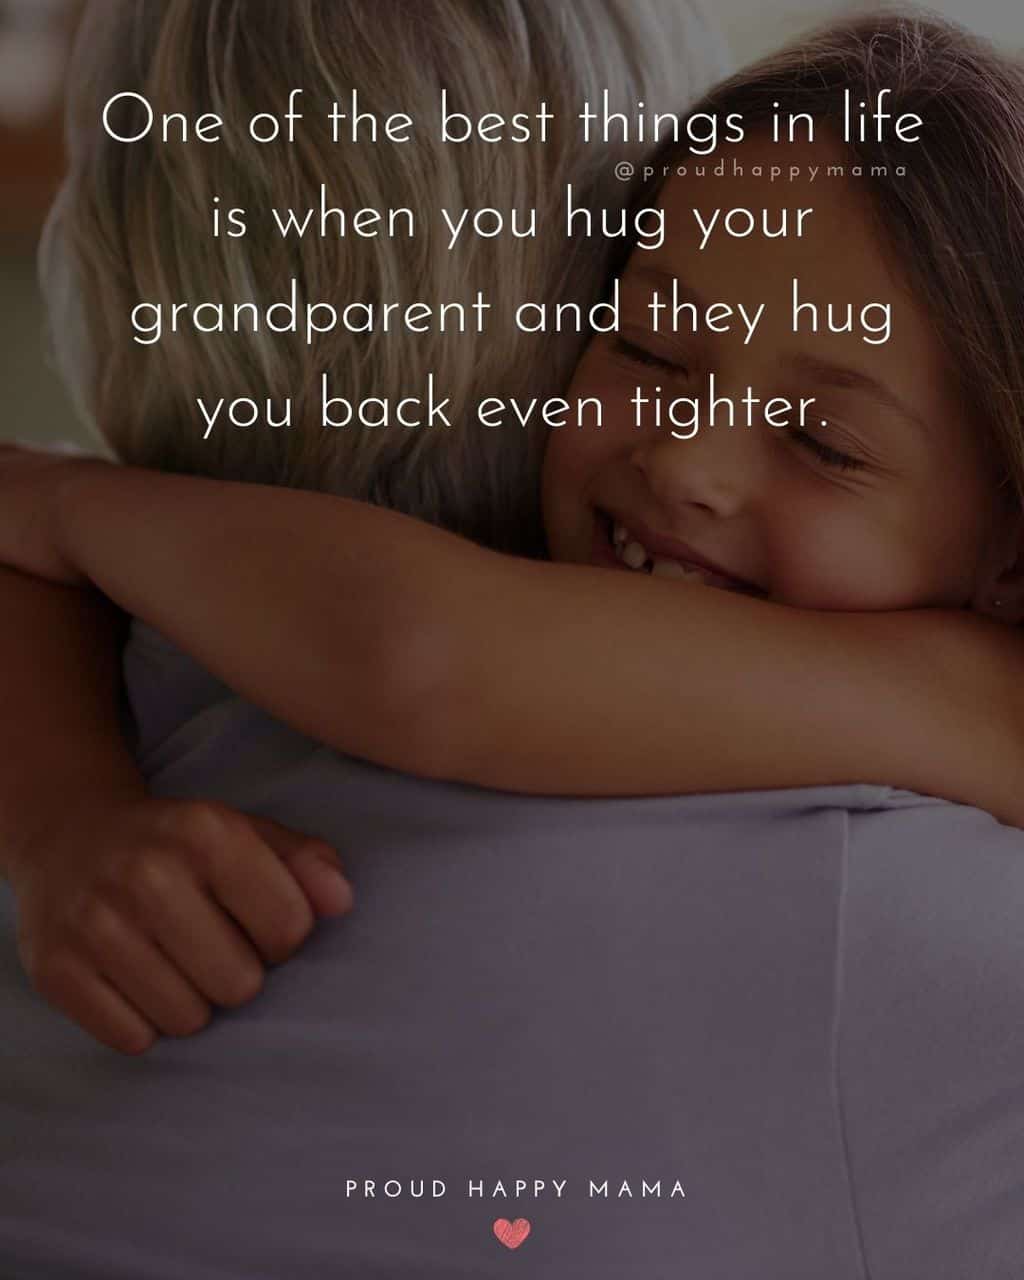 Grandparent Quotes – One of the best things in life is when you hug your grandparent and they hug you back even tighter.’